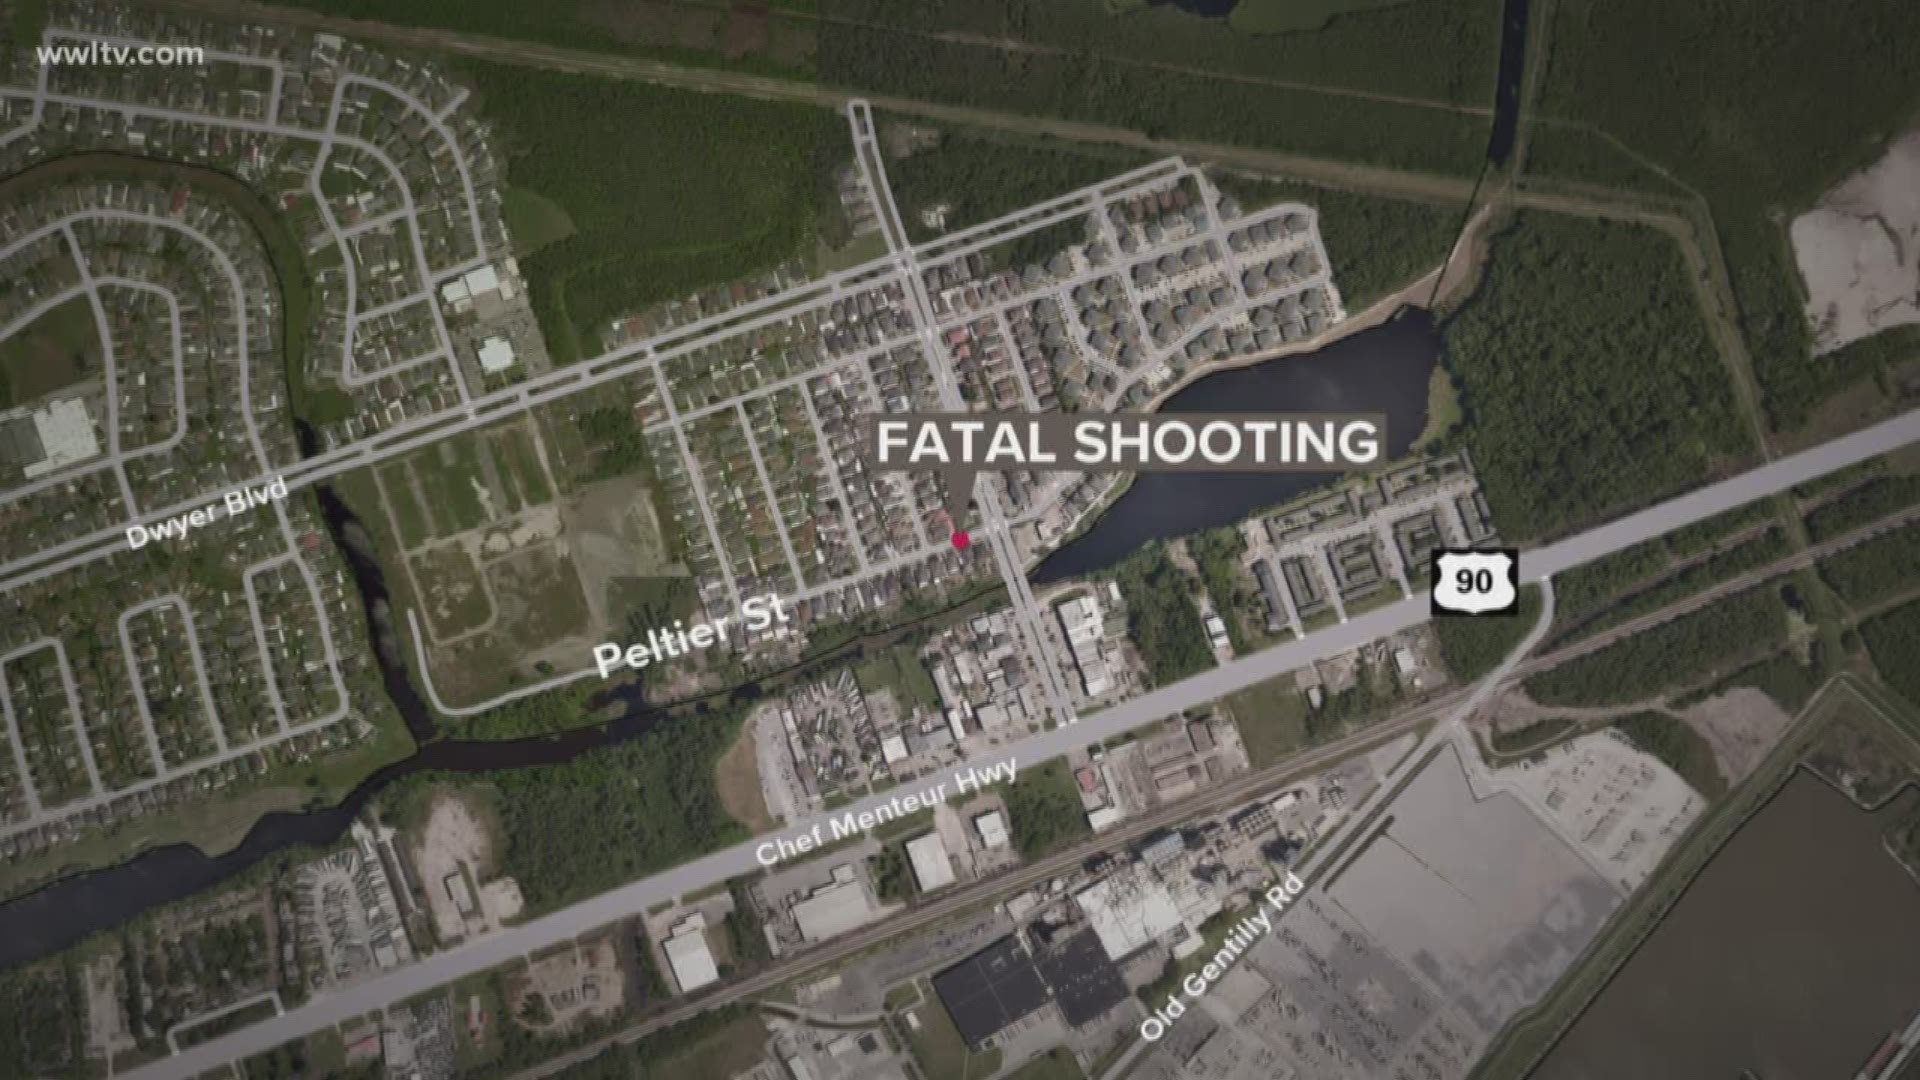 Police opened the homicide investigation into the shooting and were on the scene in New Orleans East Friday night.